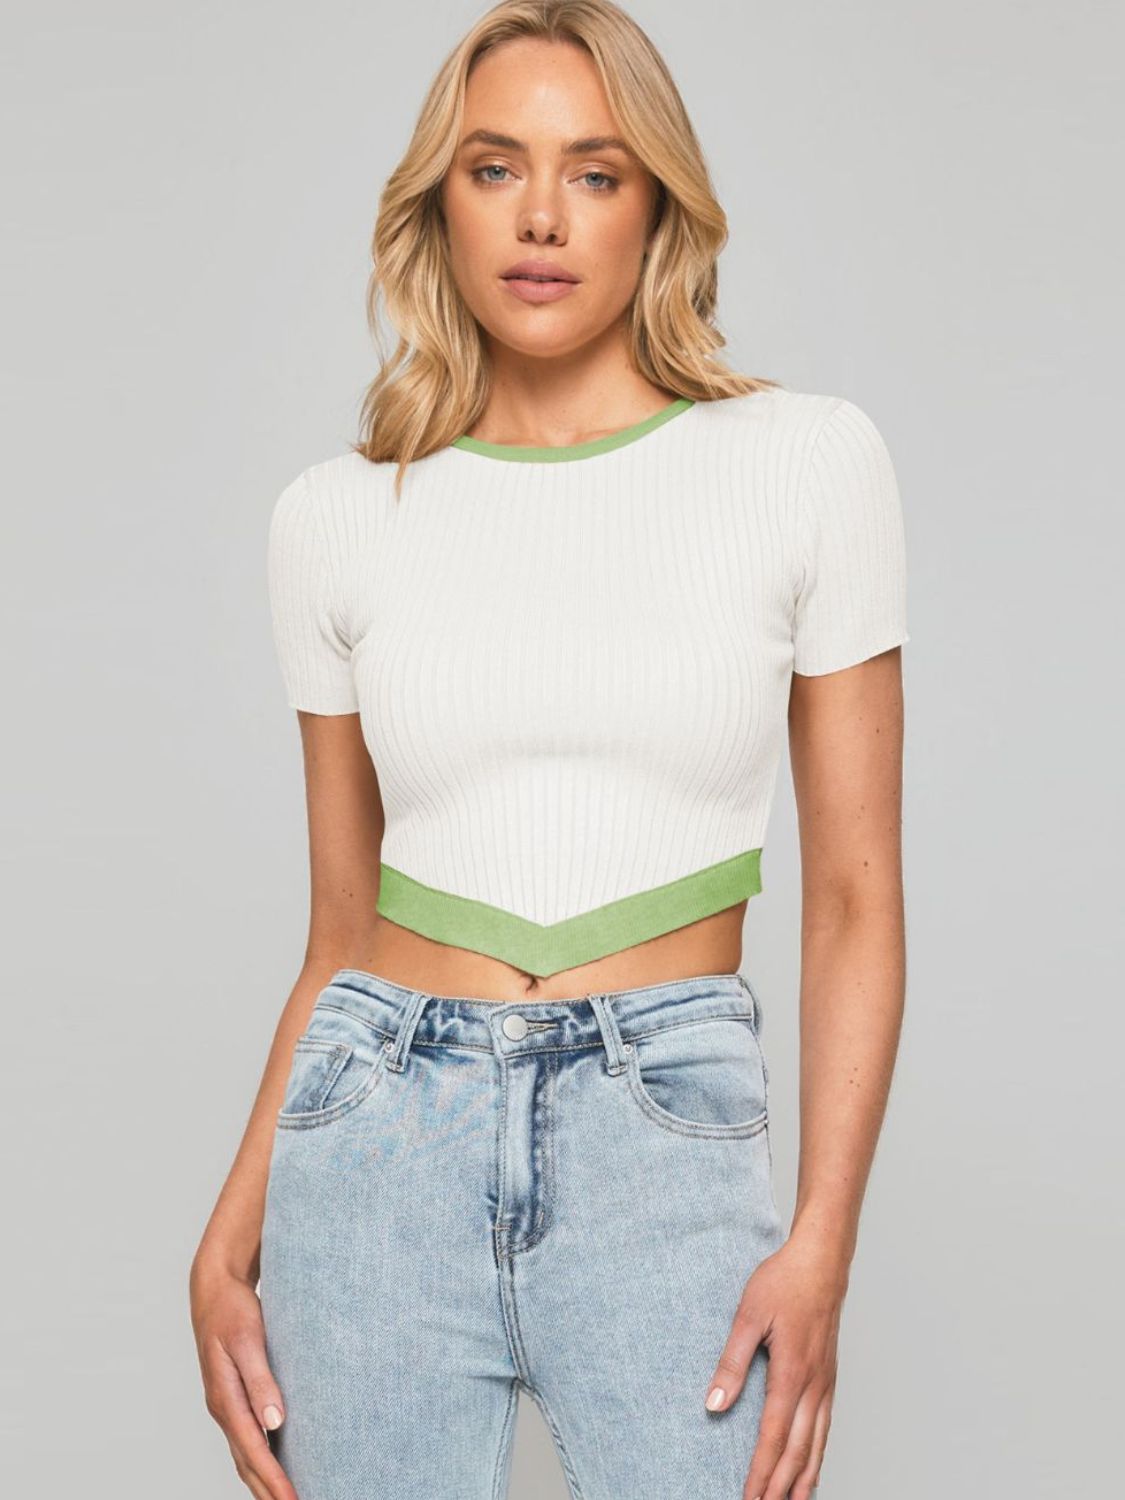 Trim Pointed Hem Ribbed Crop Top - White / S - Women’s Clothing & Accessories - Shirts & Tops - 10 - 2024